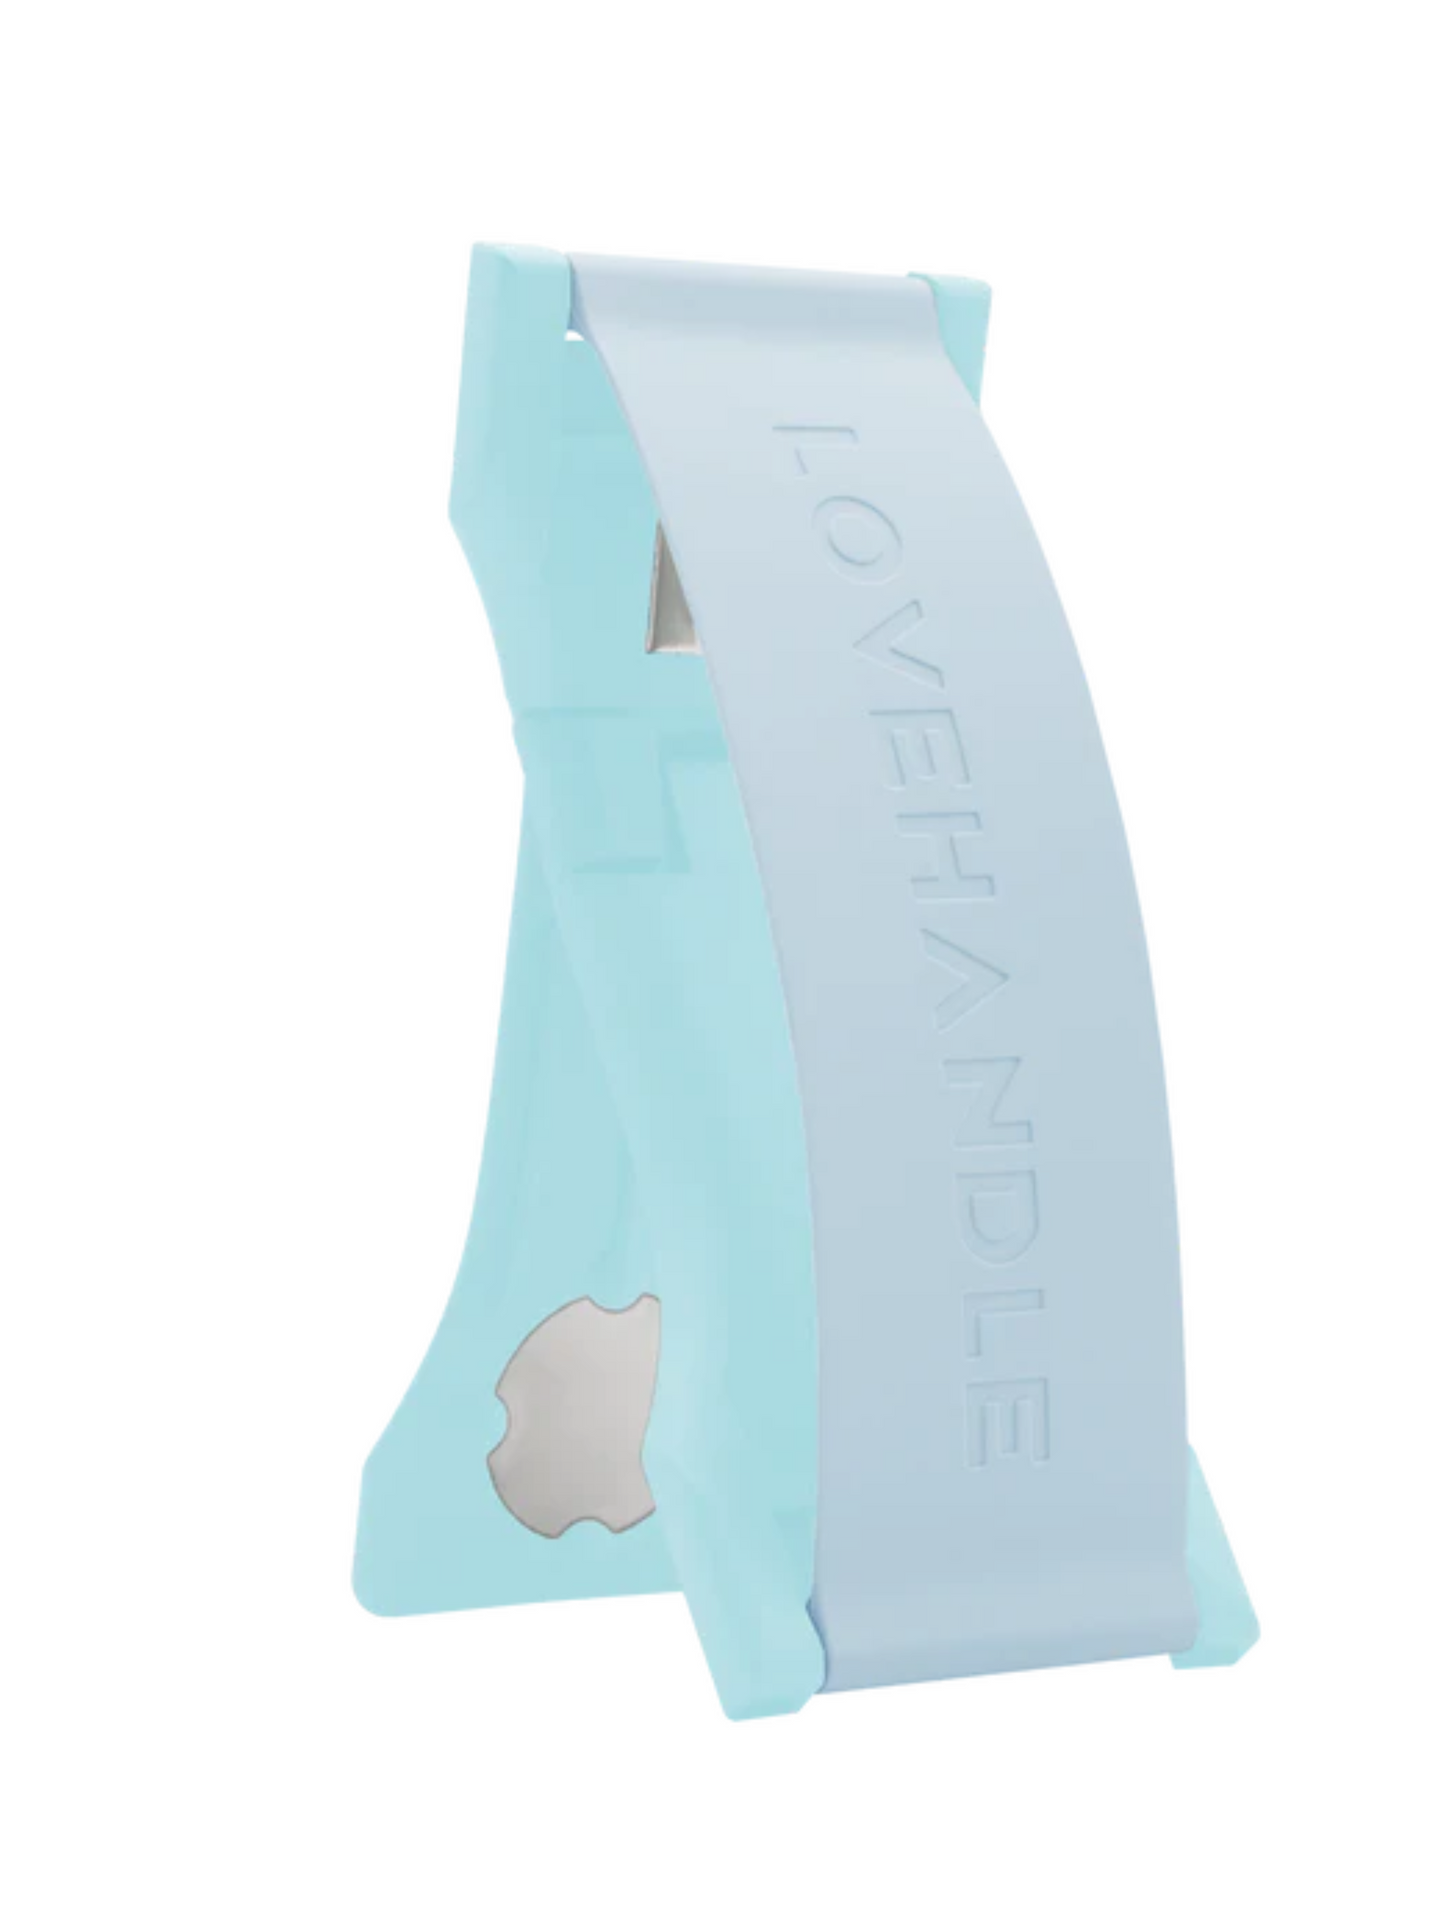 LOVE HANDLE PRO SILICONE PHONE GRIP IN FROSTY BLUE ON LIMPET BLUE BASE - THE HIP EAGLE BOUTIQUE